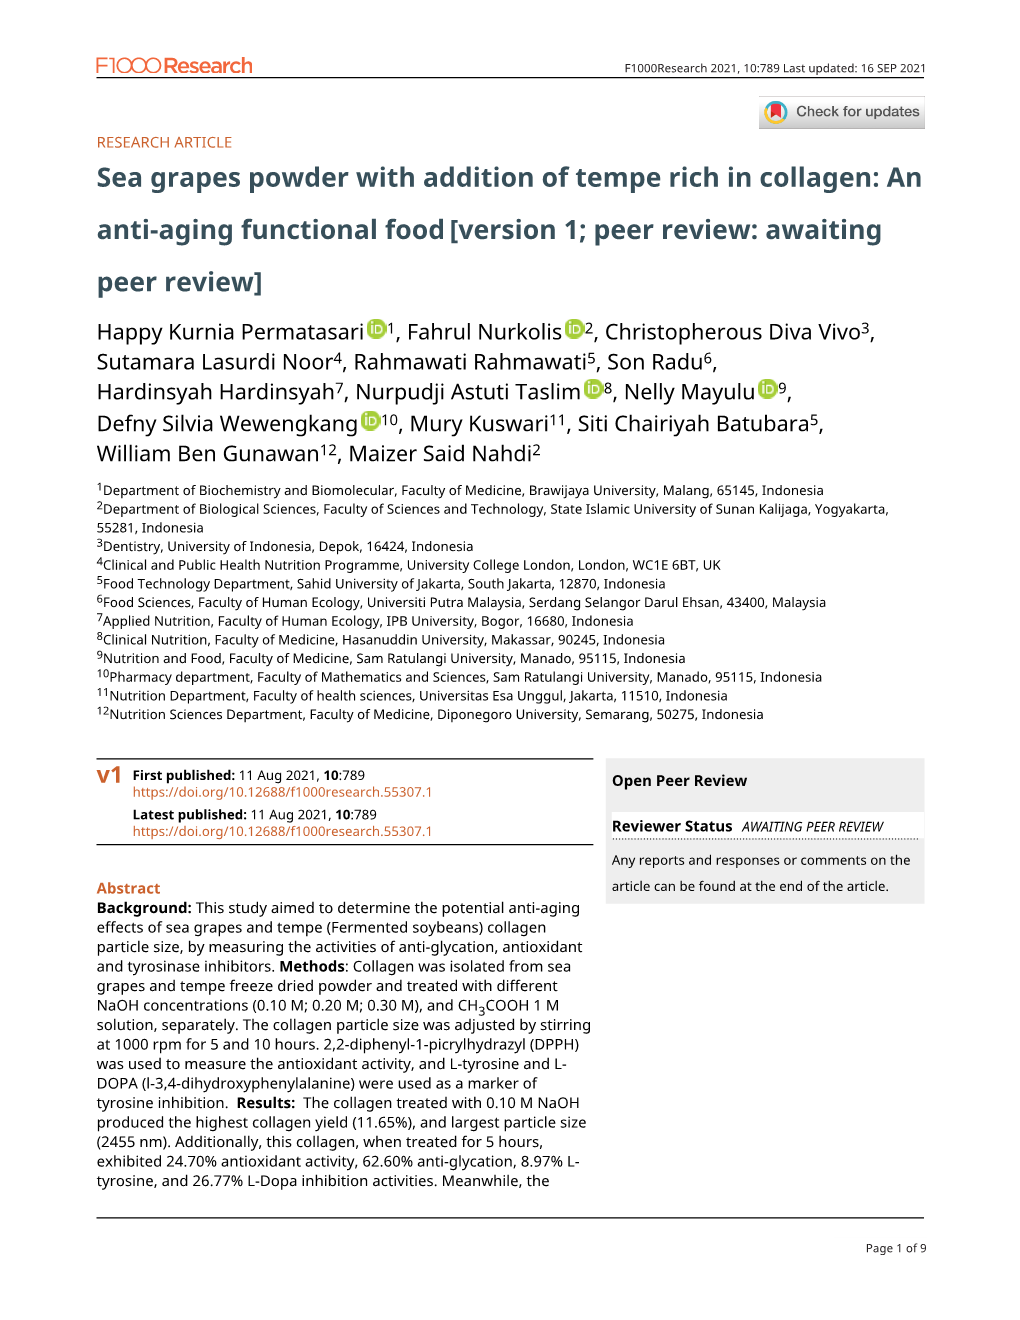 Sea Grapes Powder with Addition of Tempe Rich in Collagen: an Anti-Aging Functional Food [Version 1; Peer Review: Awaiting Peer Review]